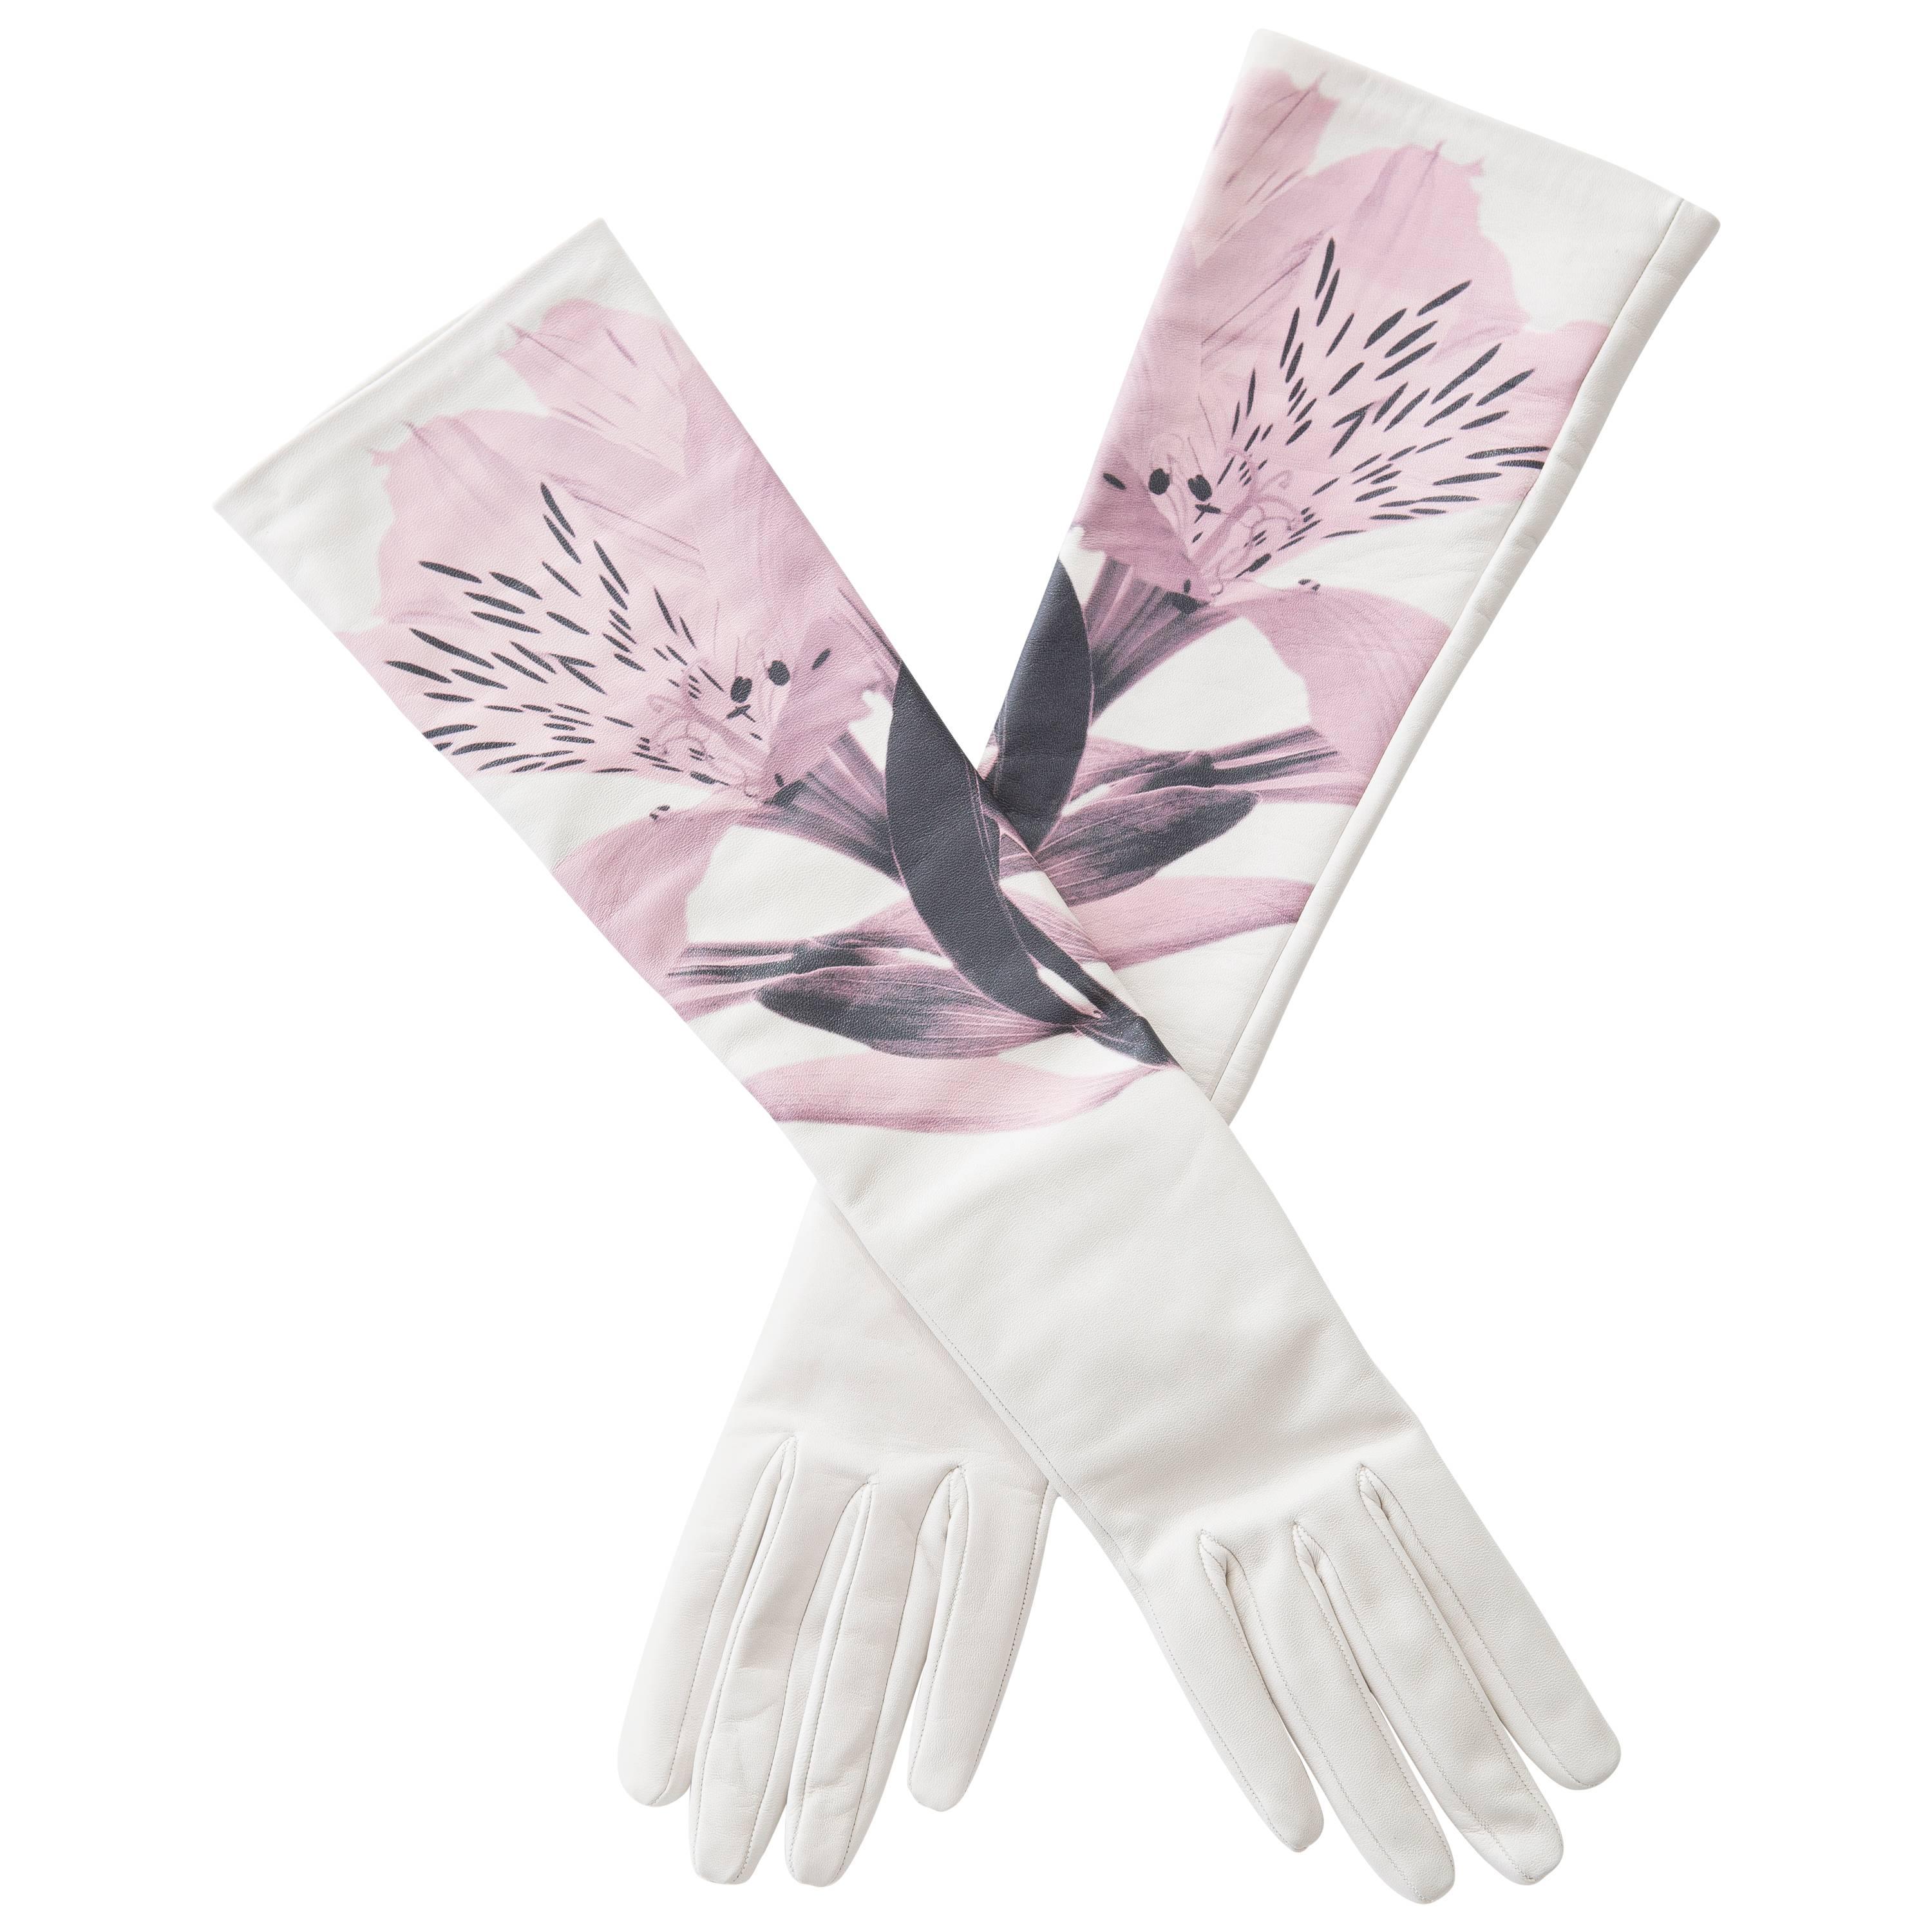  Raf Simons Christian Dior Ivory Printed Leather Gloves, Pre - Fall 2014